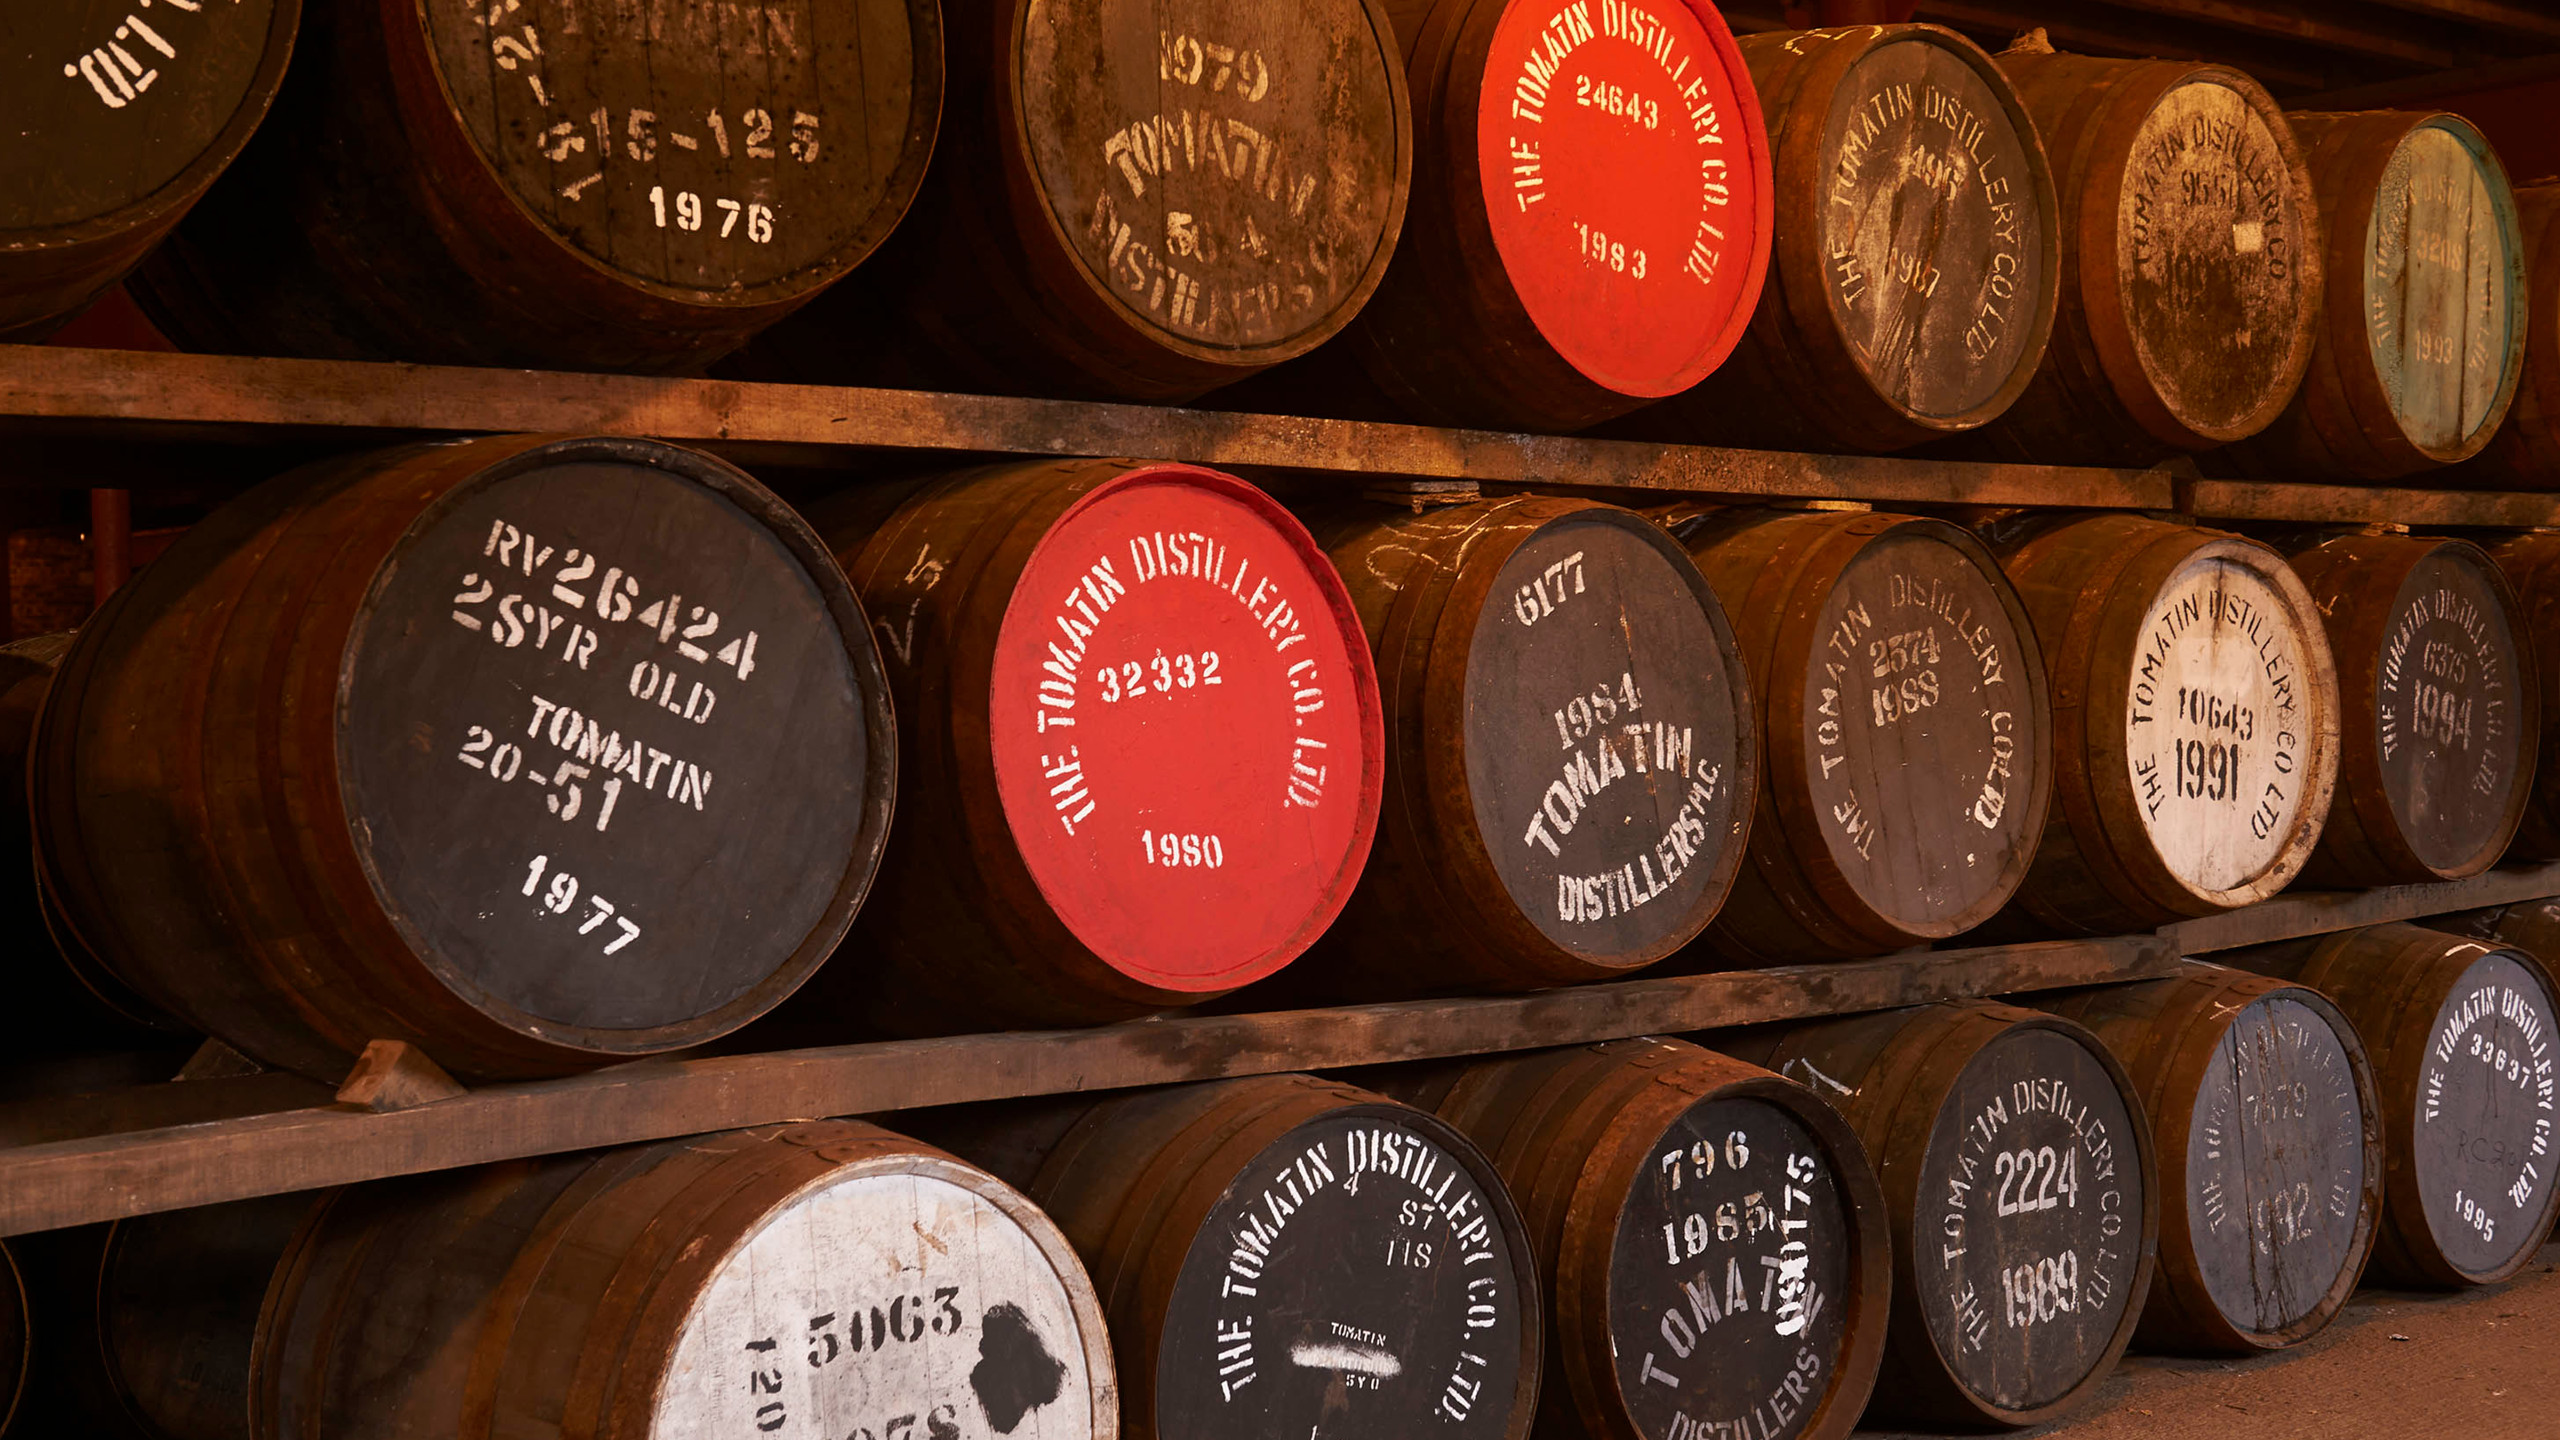 A wall of whisky aging barrels